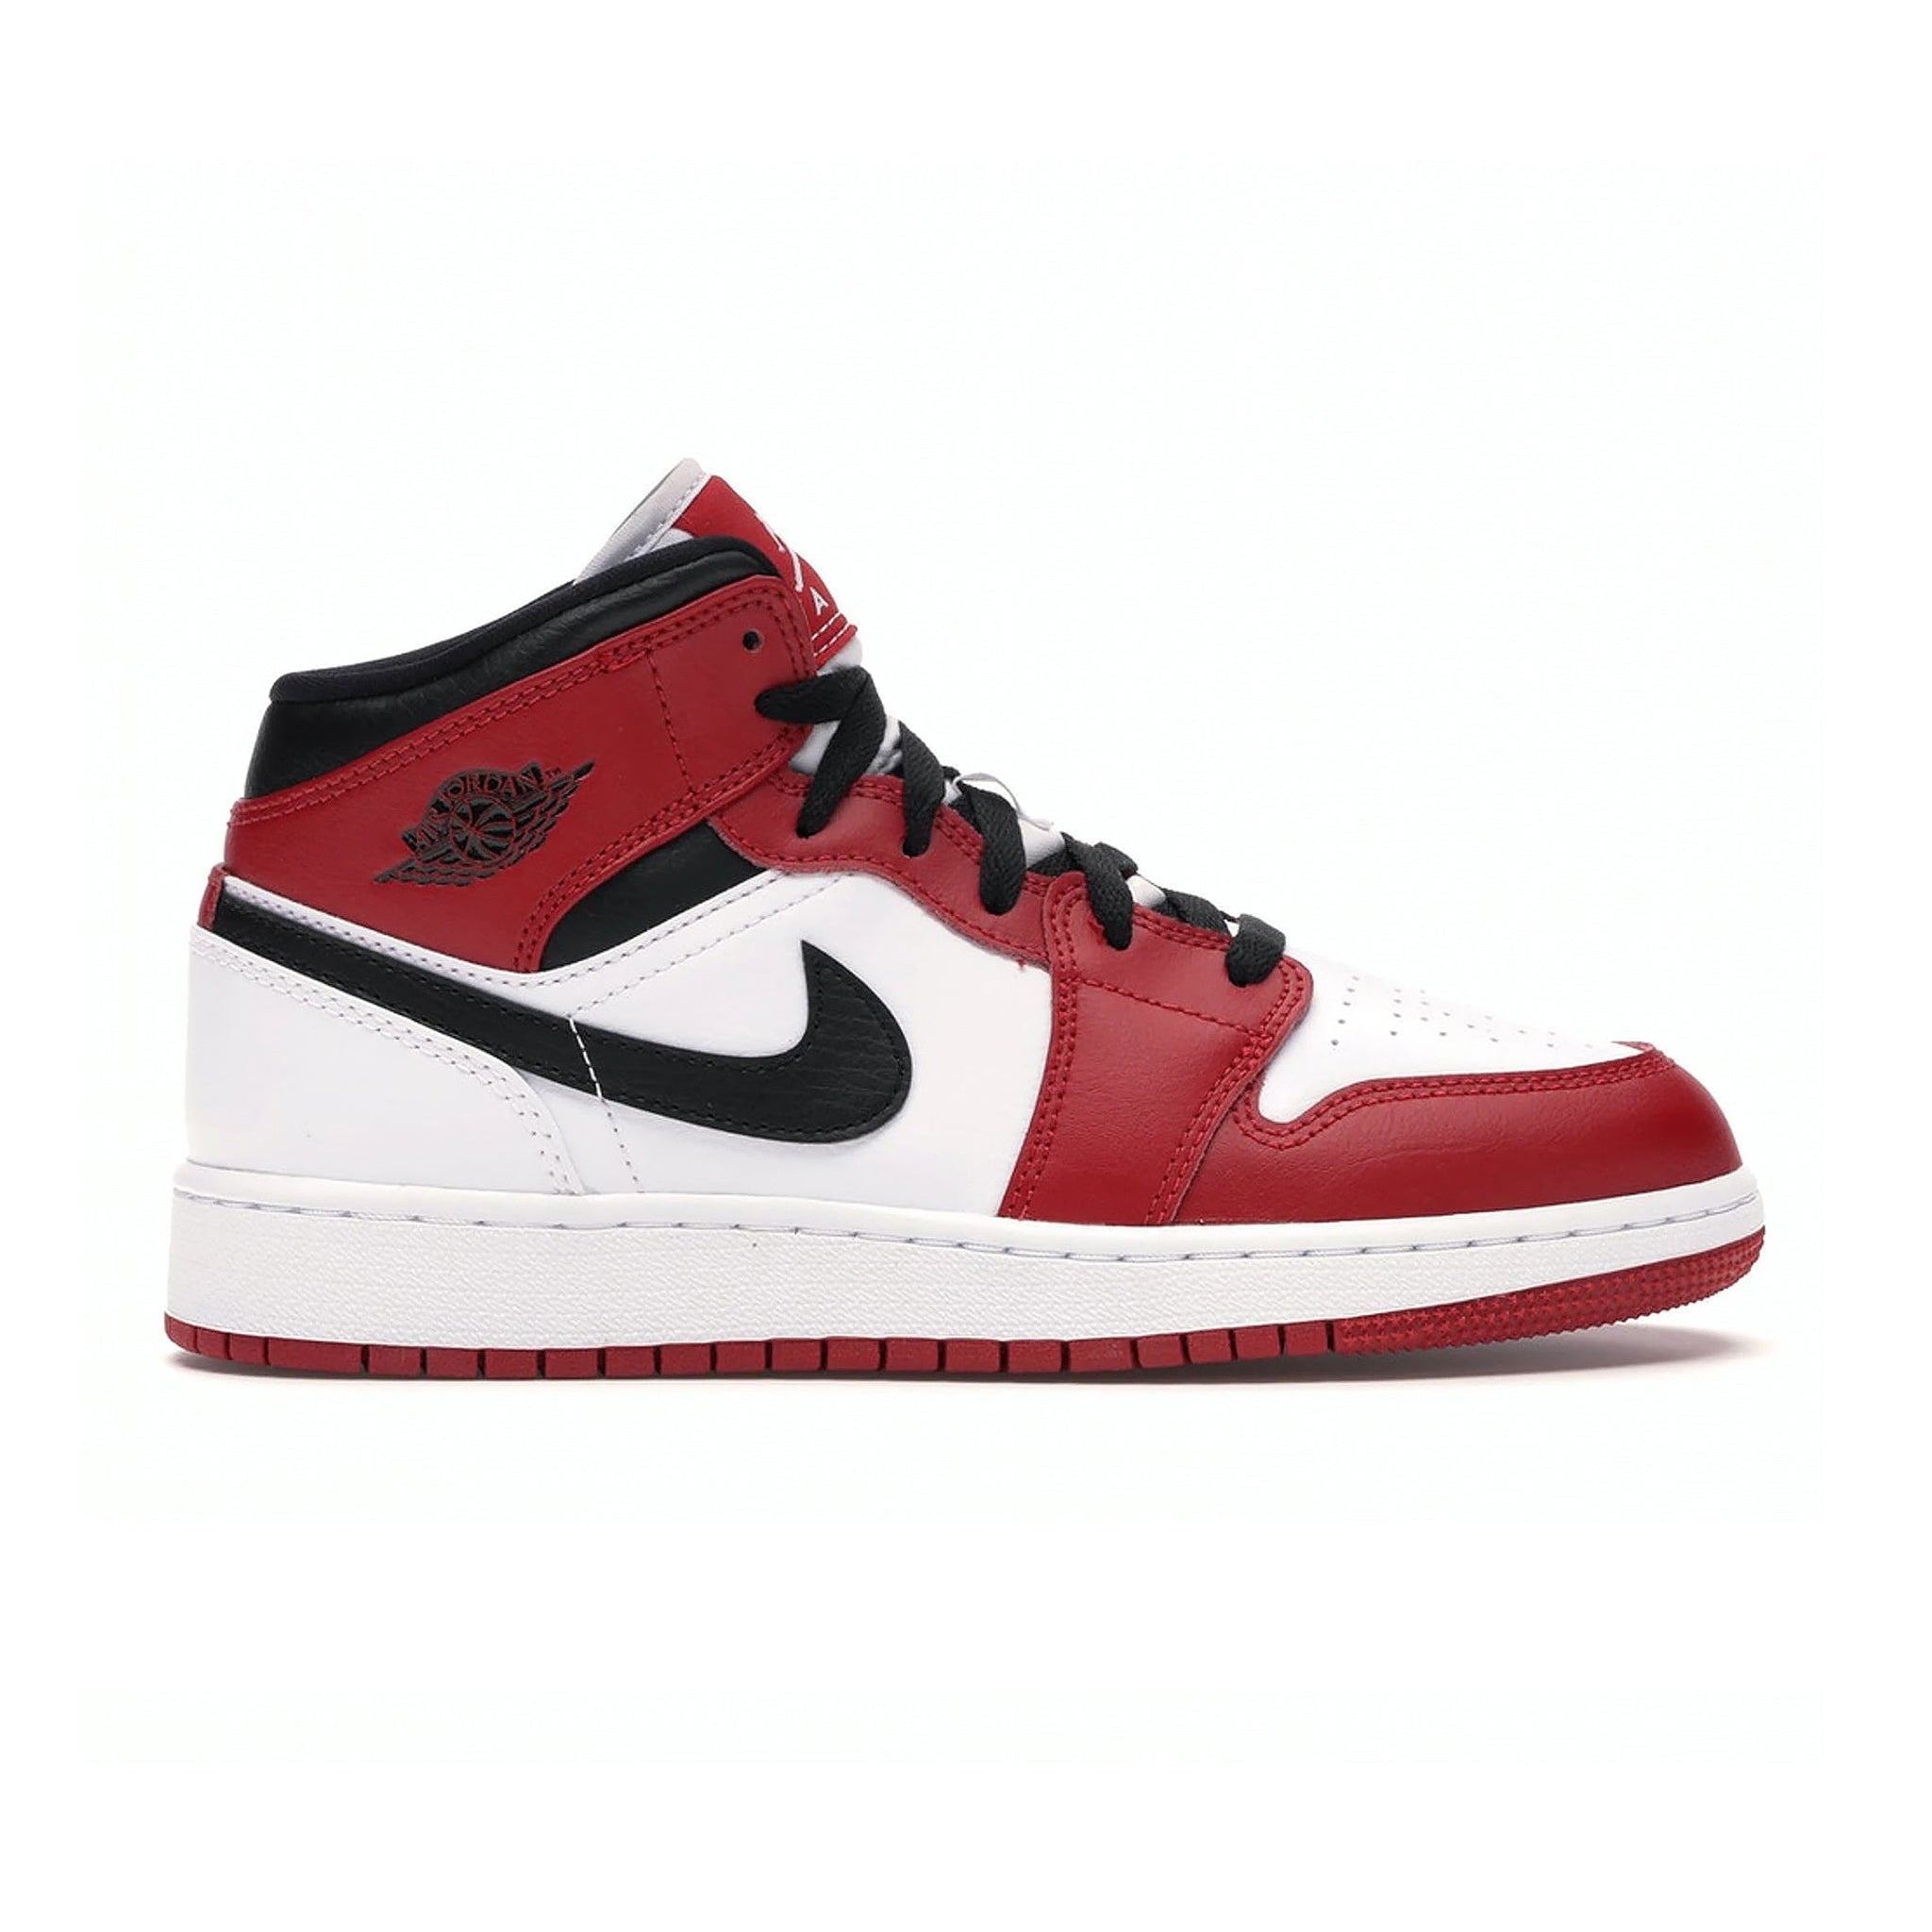 Side view of Air Jordan 1 Mid Chicago 2020 (GS) 554725-173